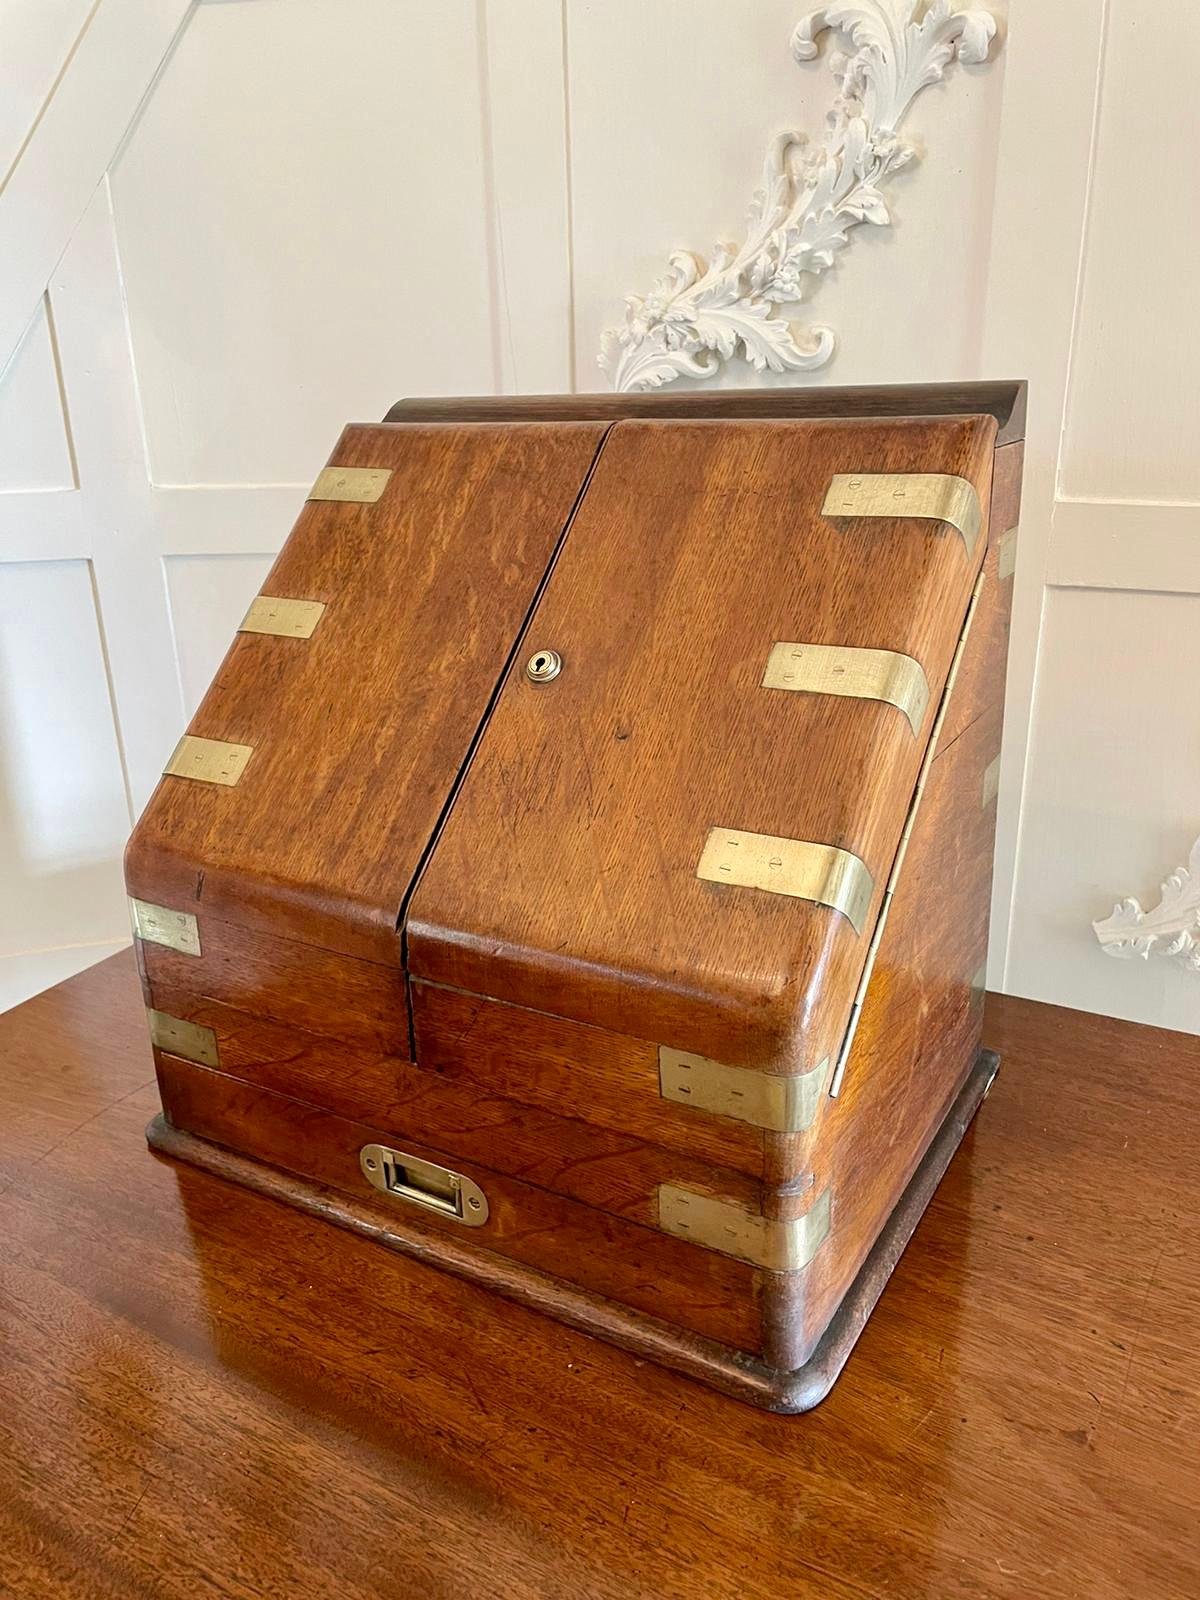 Victorian 19th century antique figured oak military stationery box having two figured oak doors with military brass bands opening to reveal a lovely fully fitted interior comprising a date, day and month calendar, shaped letter rack, pen tray,